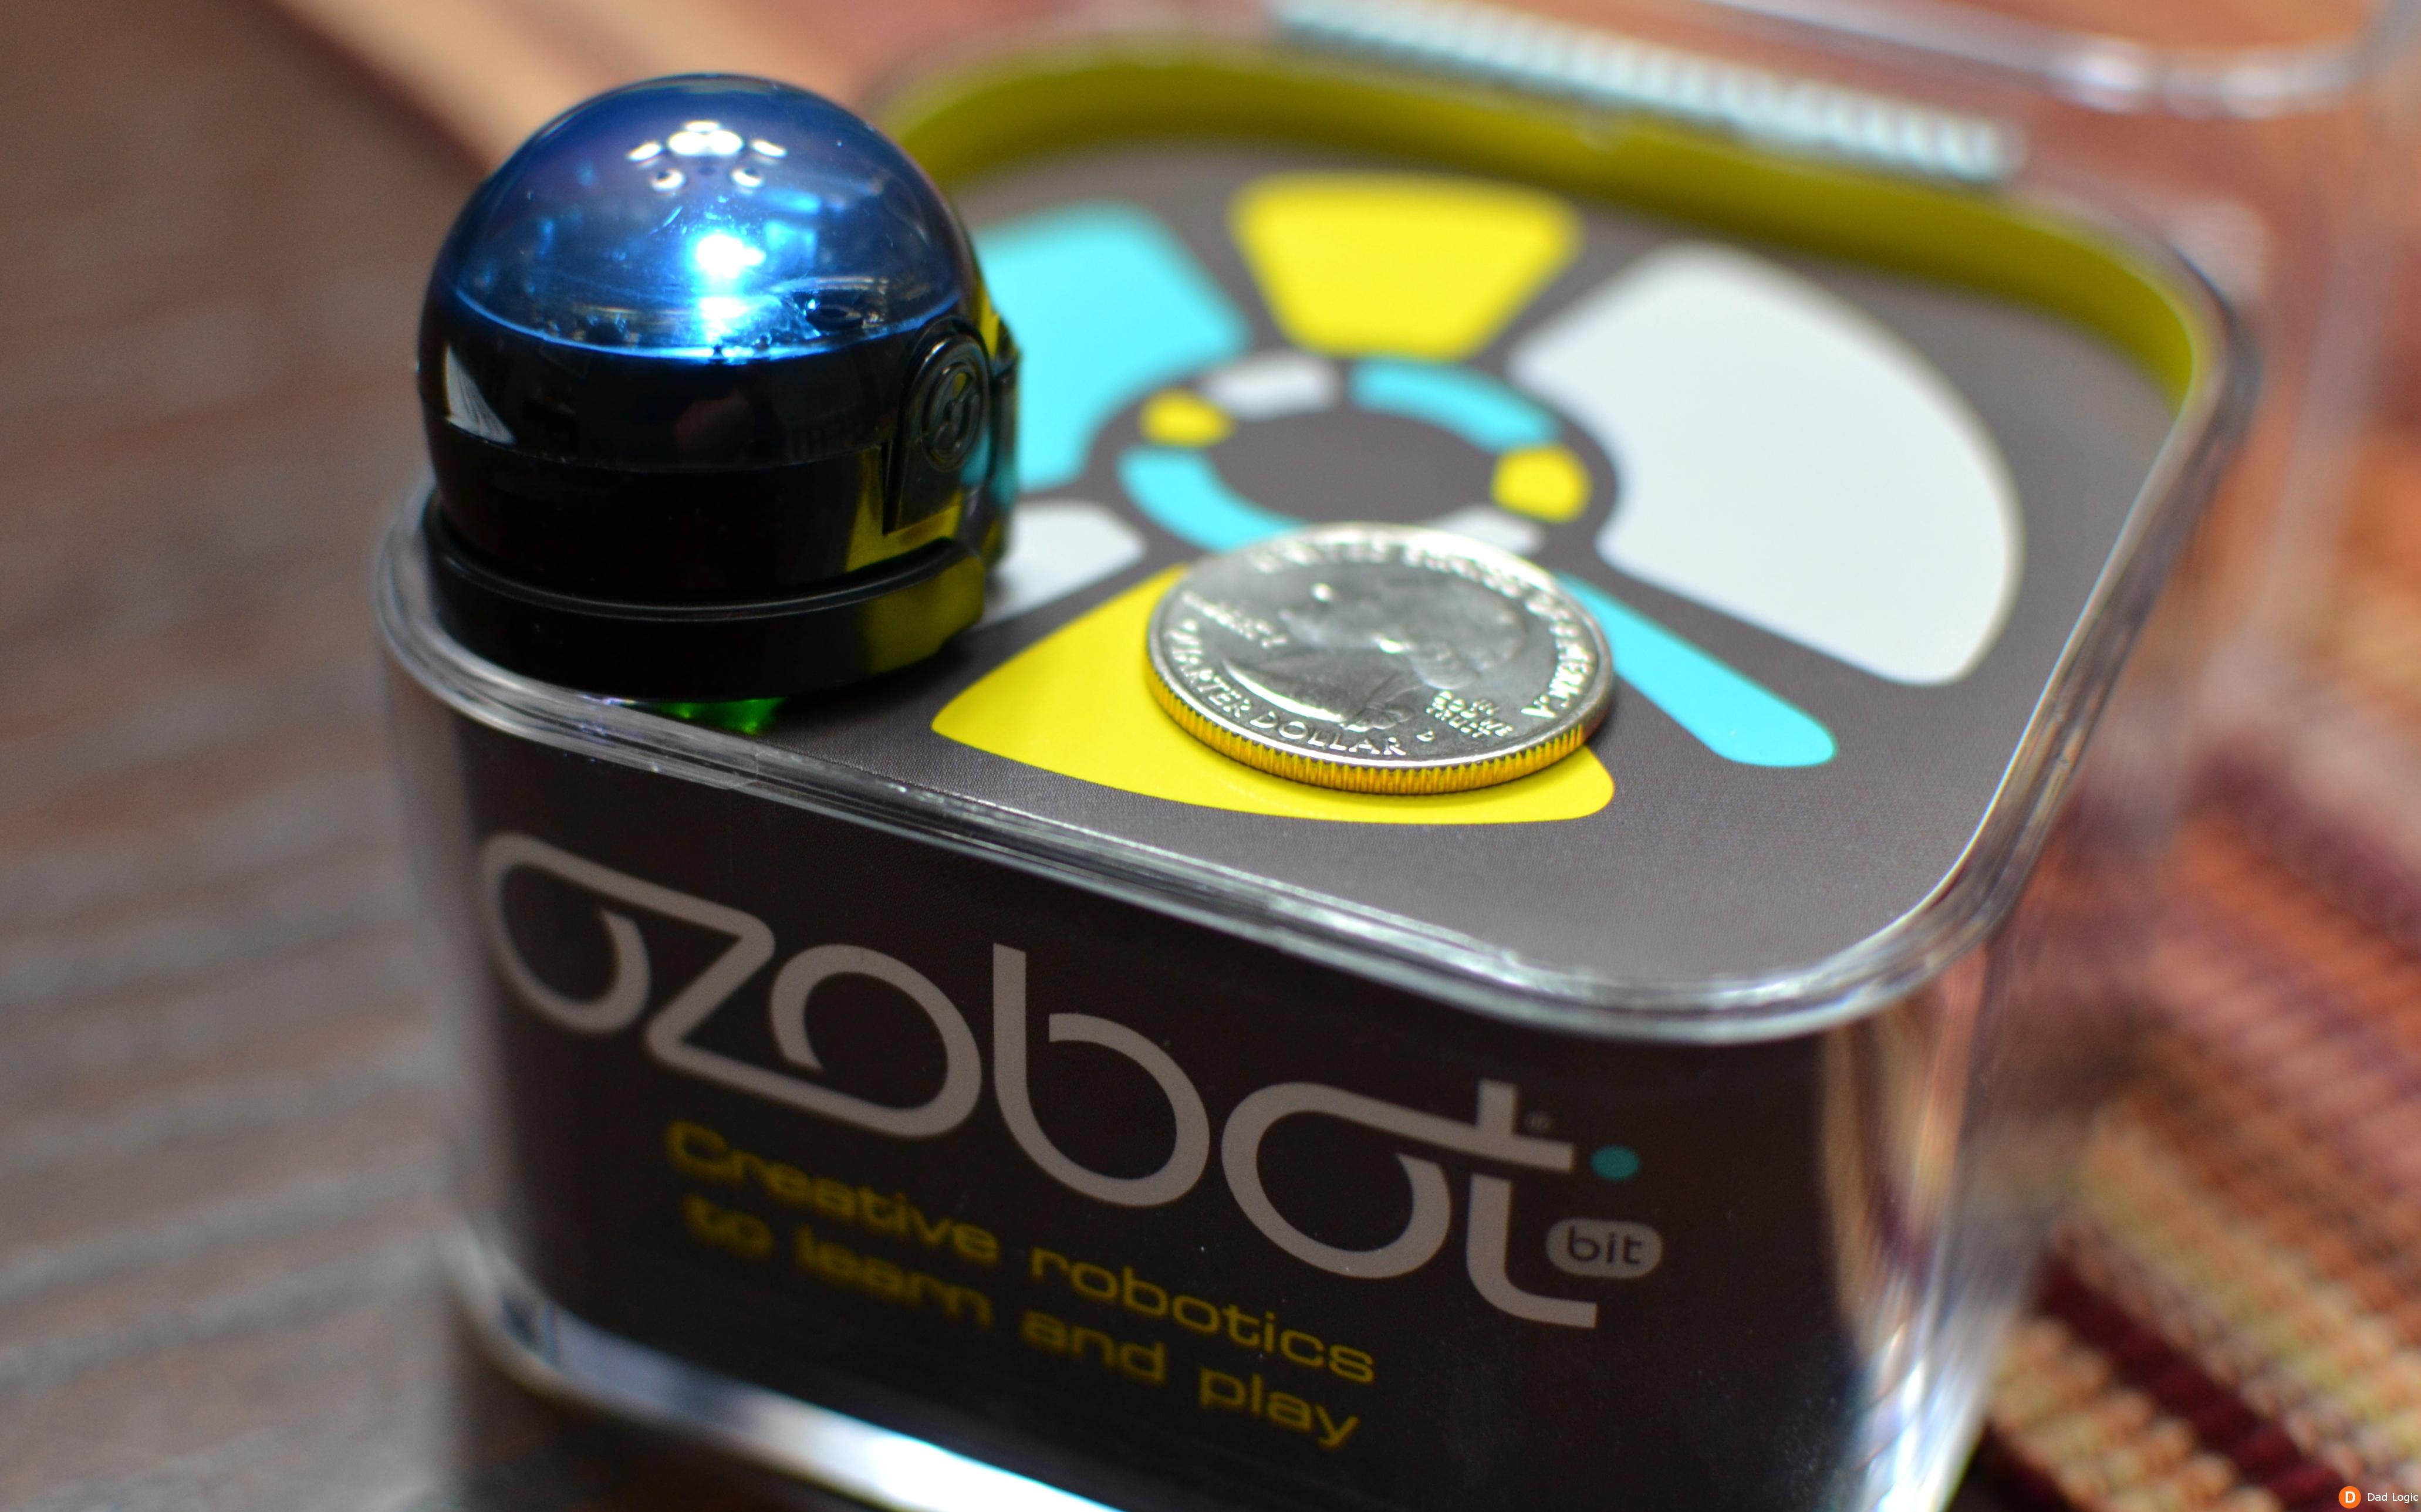 Ozobot Bit is an Amazing Little Robot Your Child Can Program - Dad